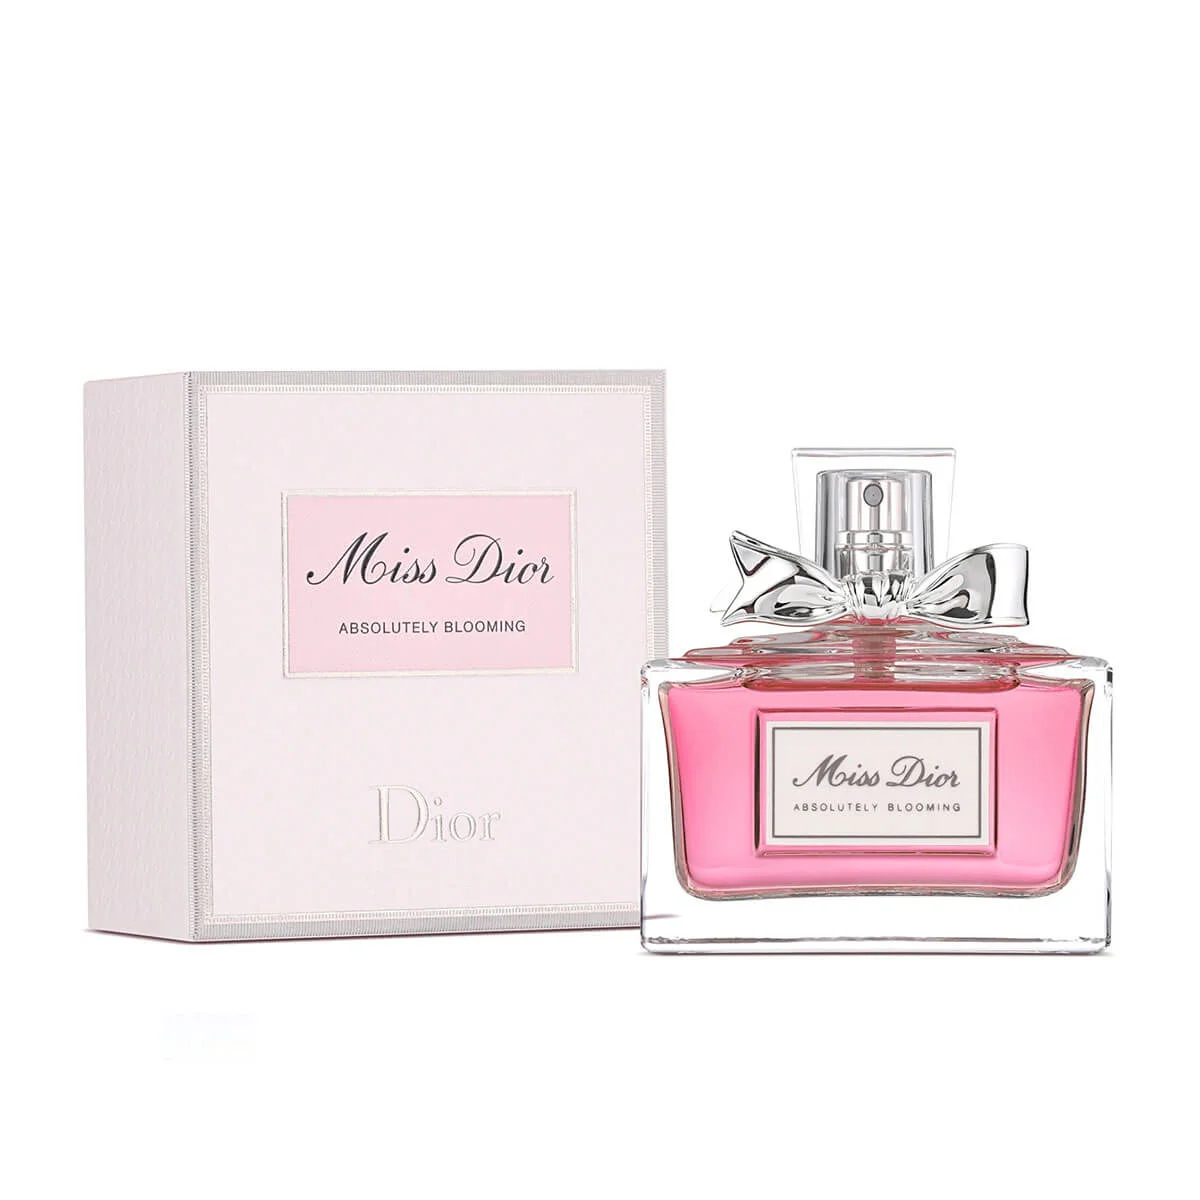 Nước hoa Miss Dior Absolutely Blooming 100ml  Thelook17